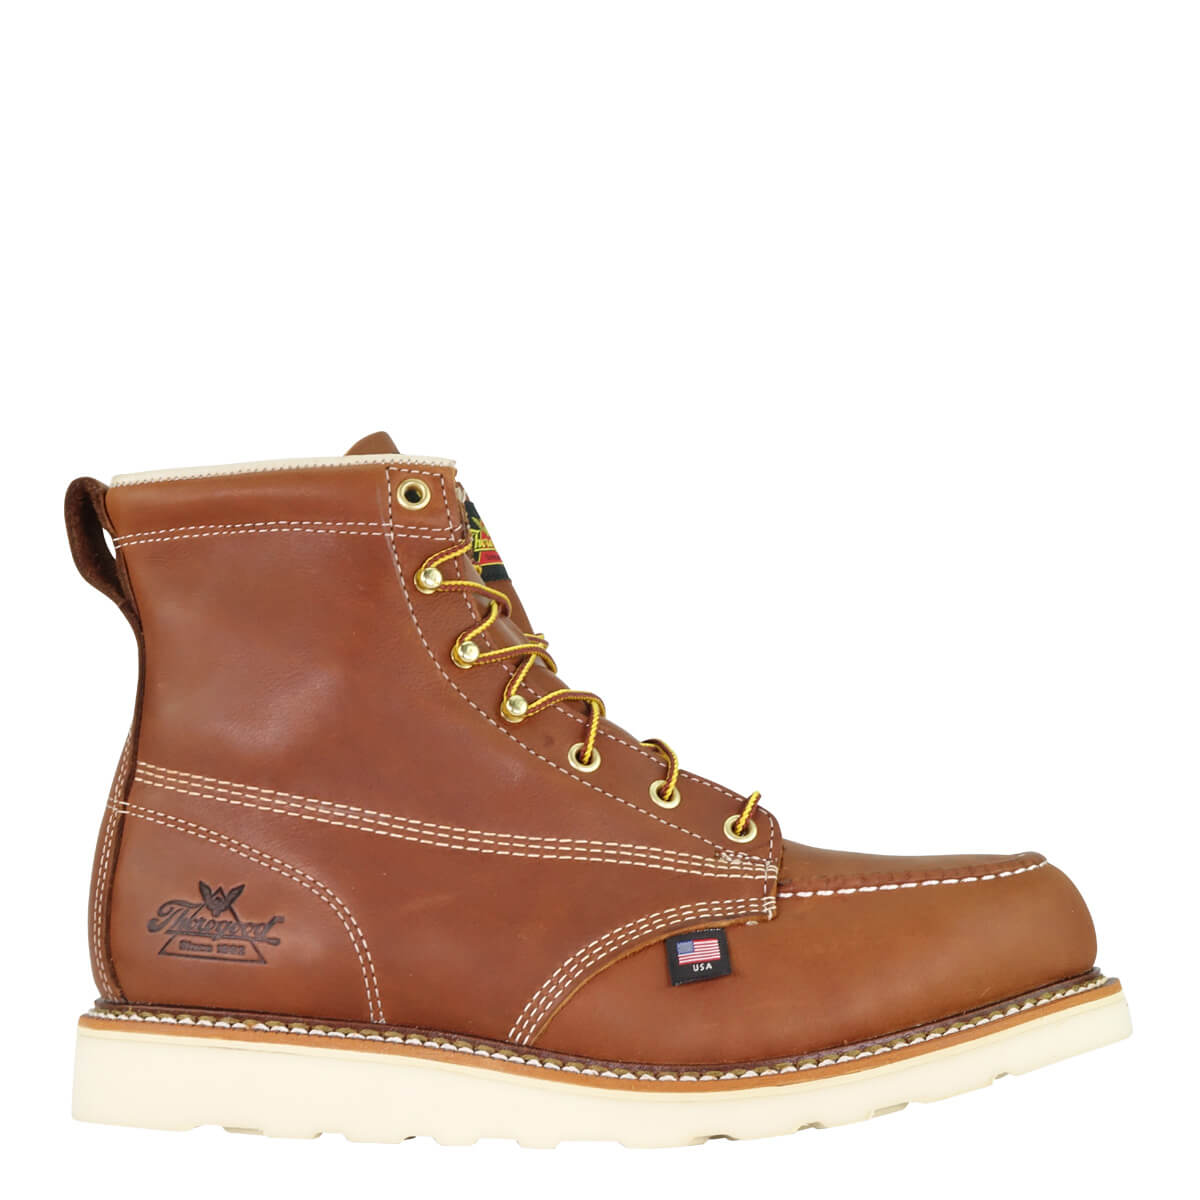 American Heritage - 6" Tobacco Safety Toe